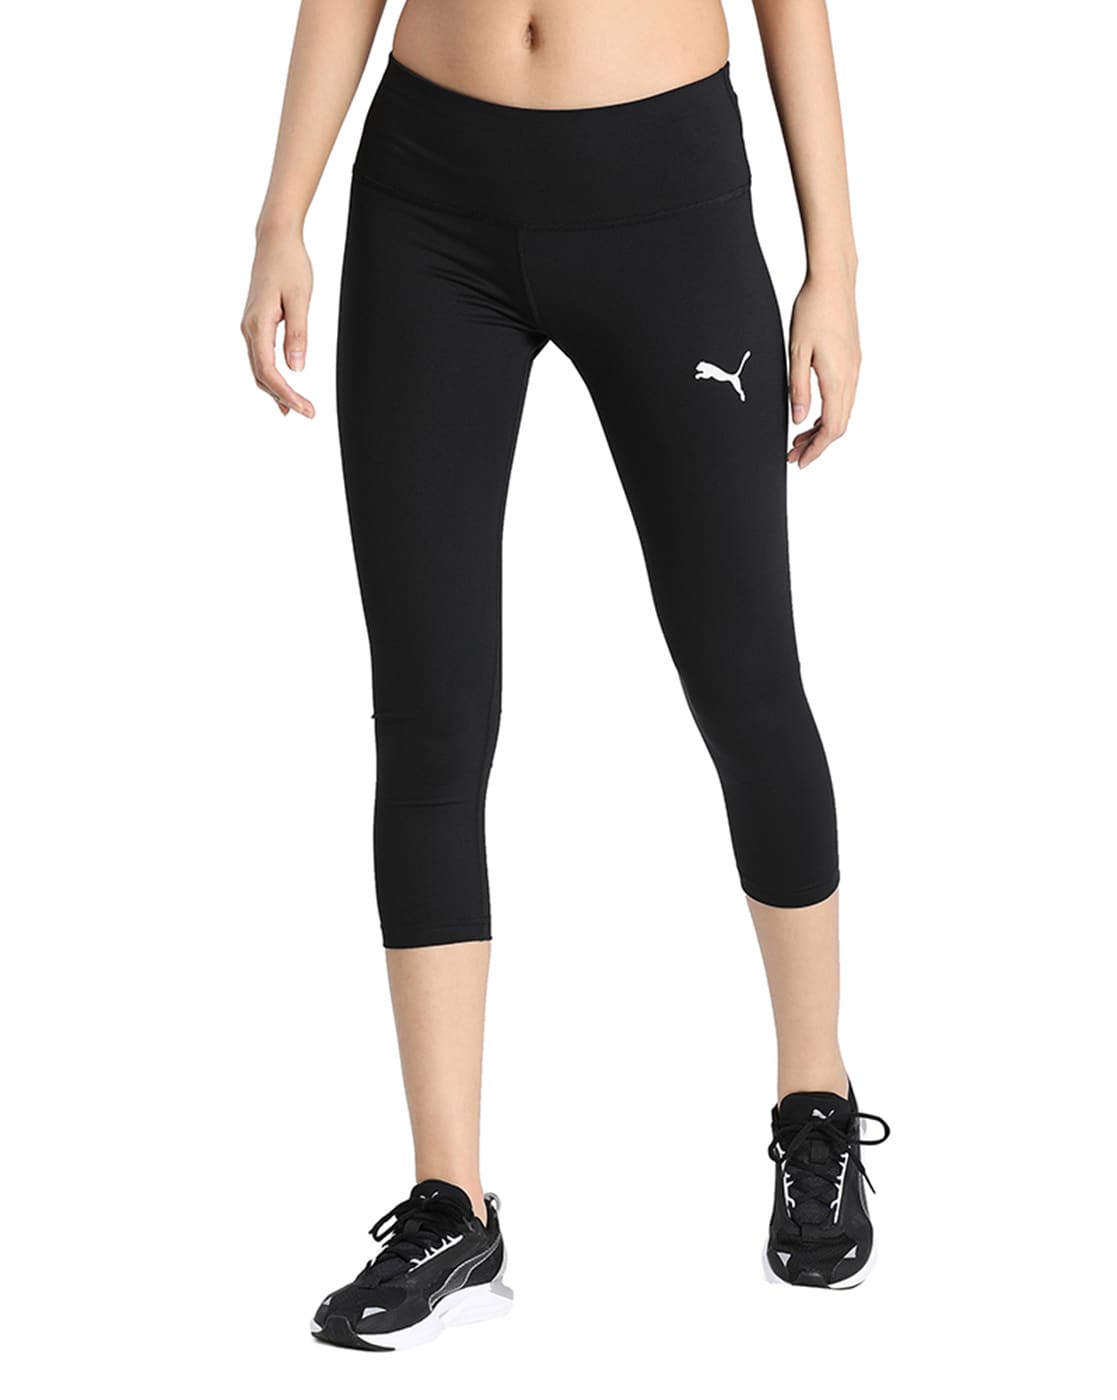 lï-jaa yggdrazil black leggings 3/4 mid length with lace and lacing on  calves